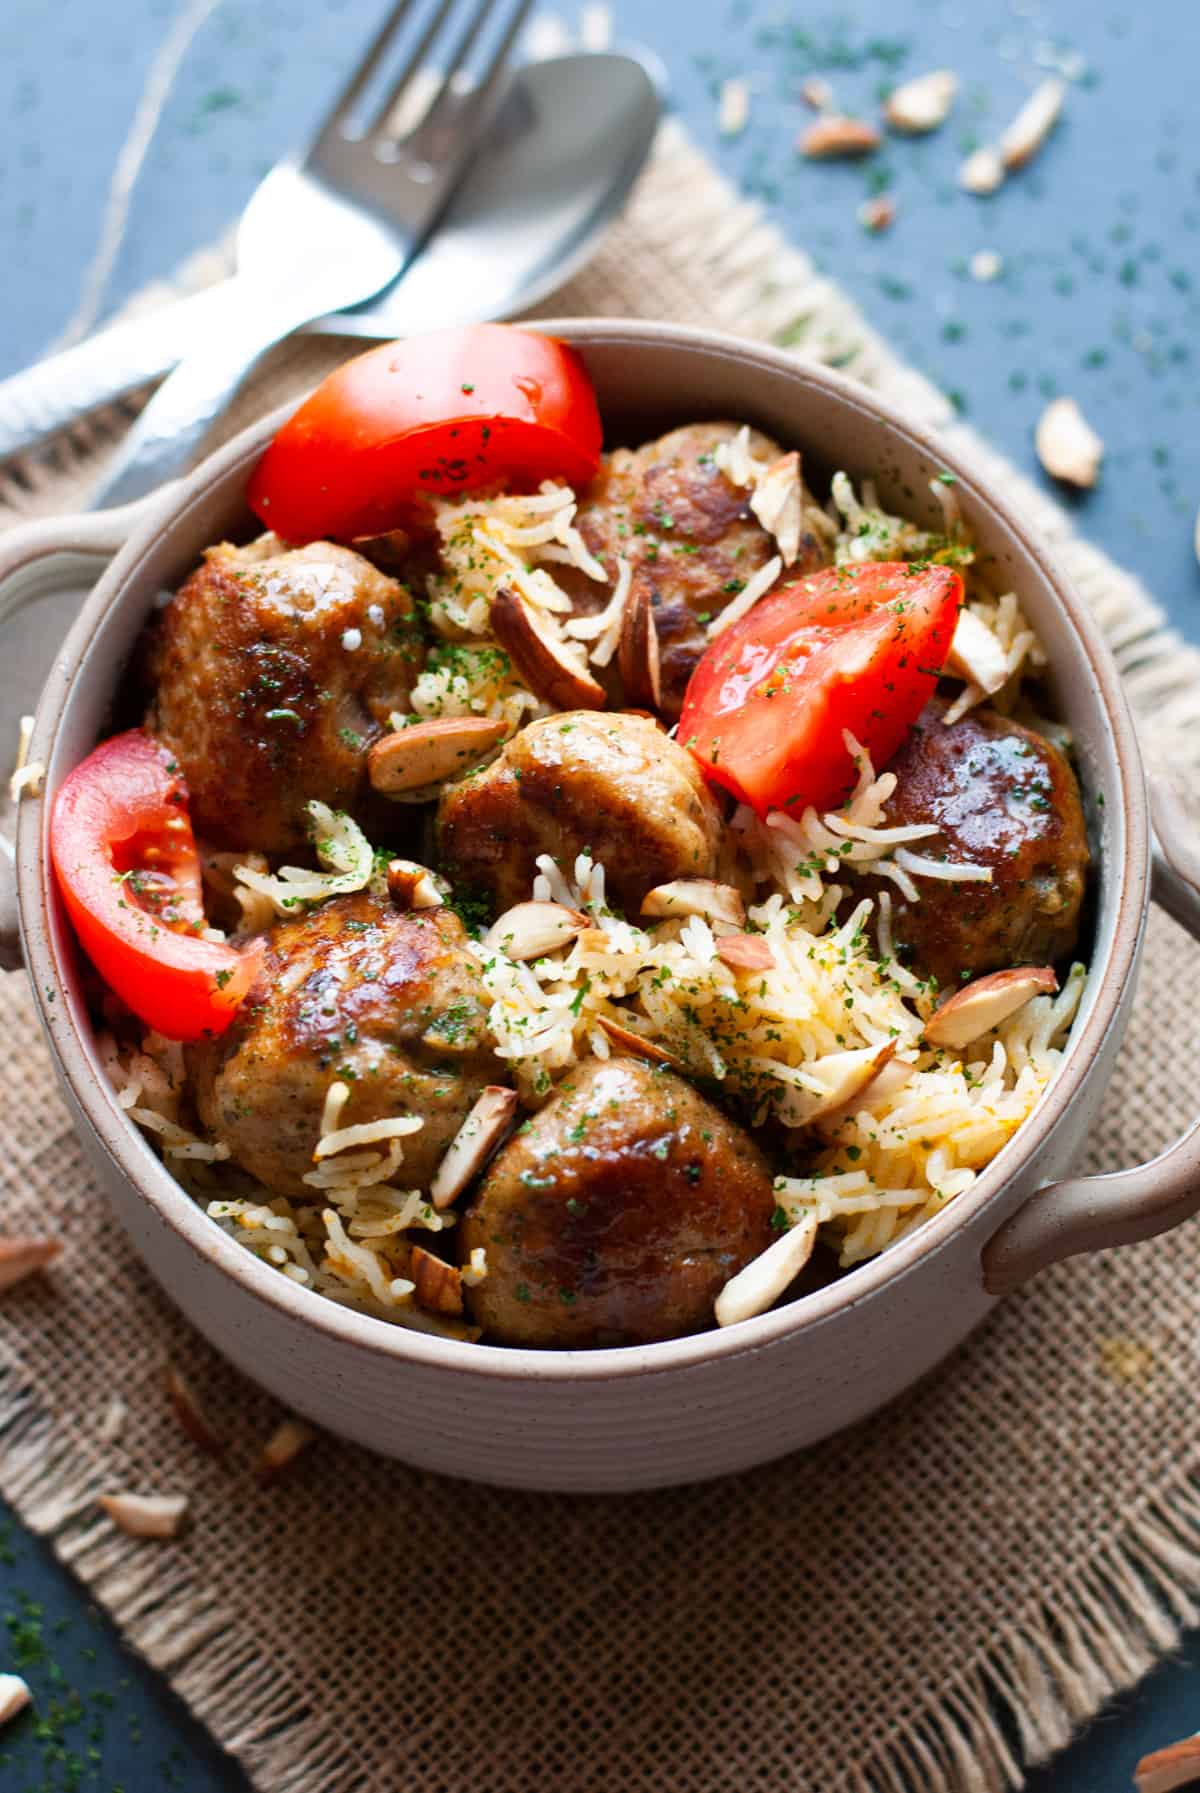 meatballs and rice in bowl